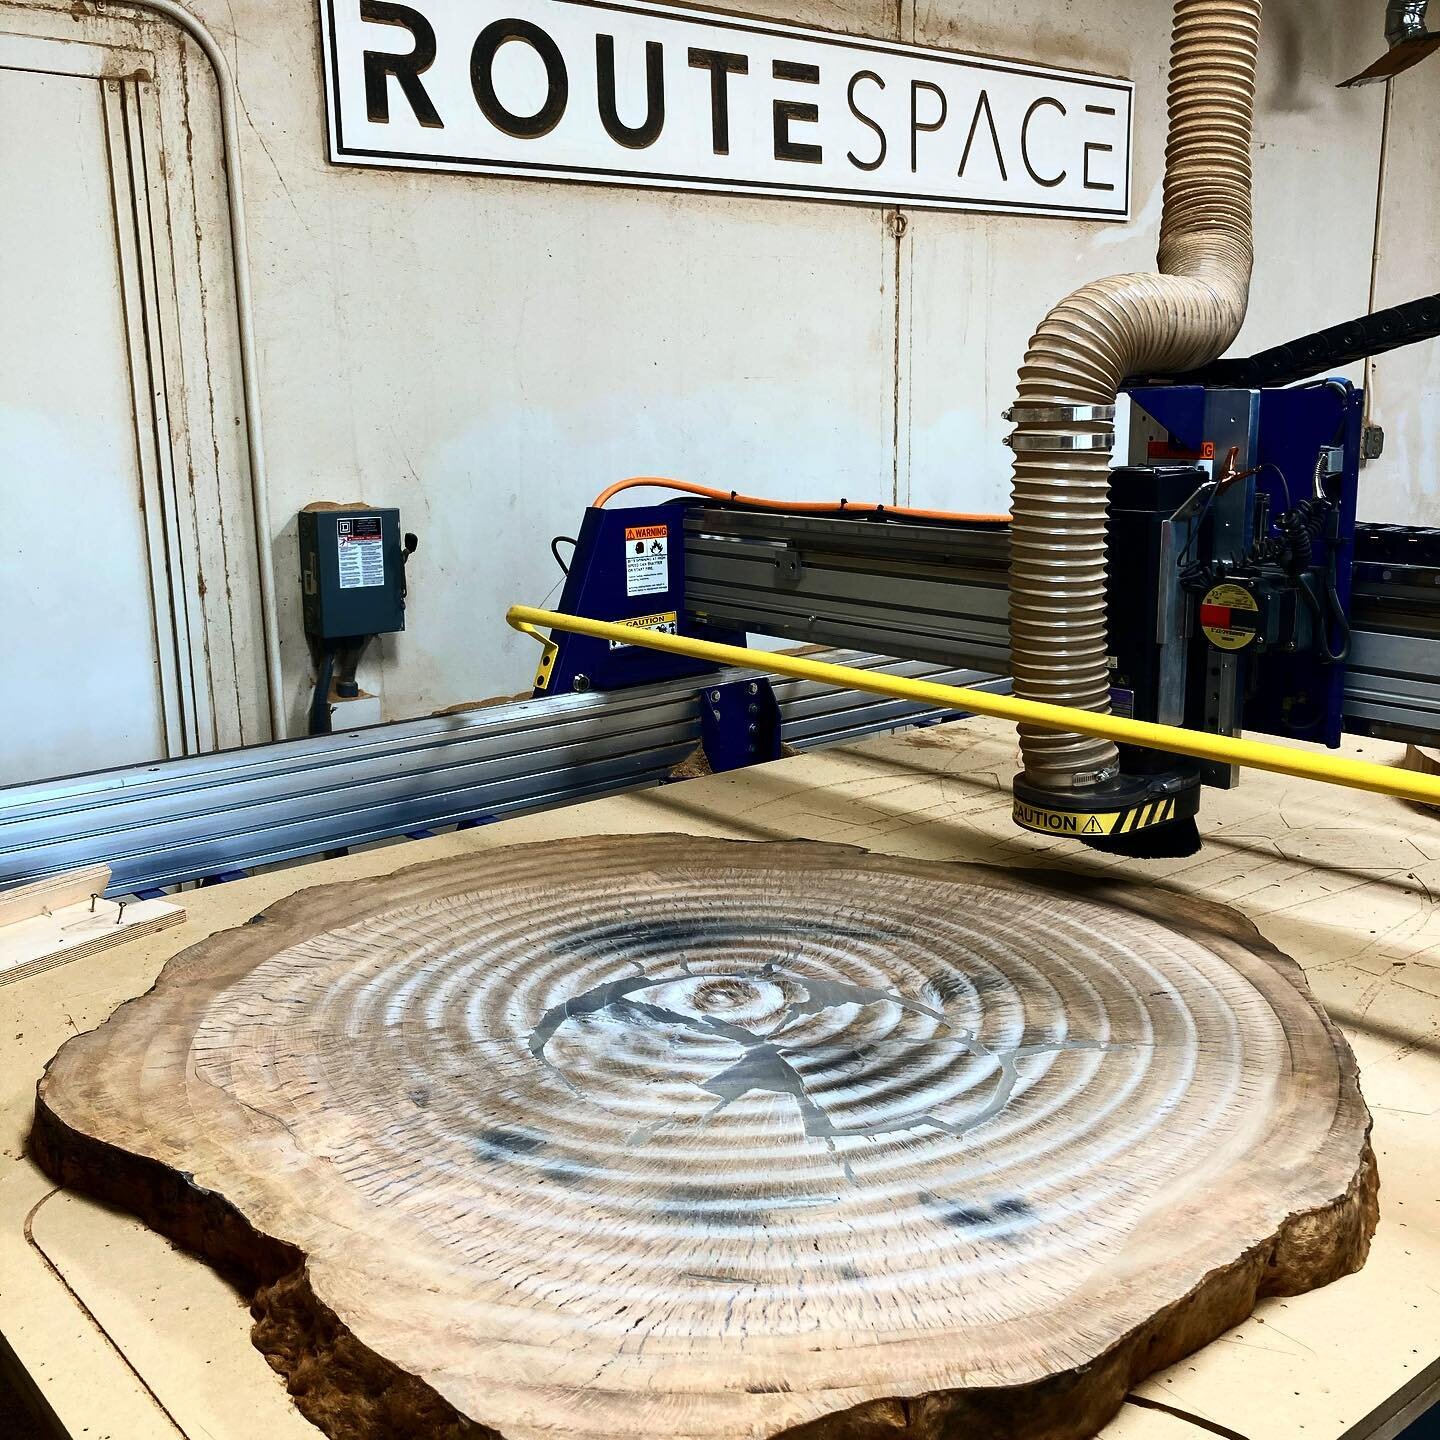 50&rdquo; diameter oak cookie for @littlesliveedge.  This is going to be one nice coffee table soon.